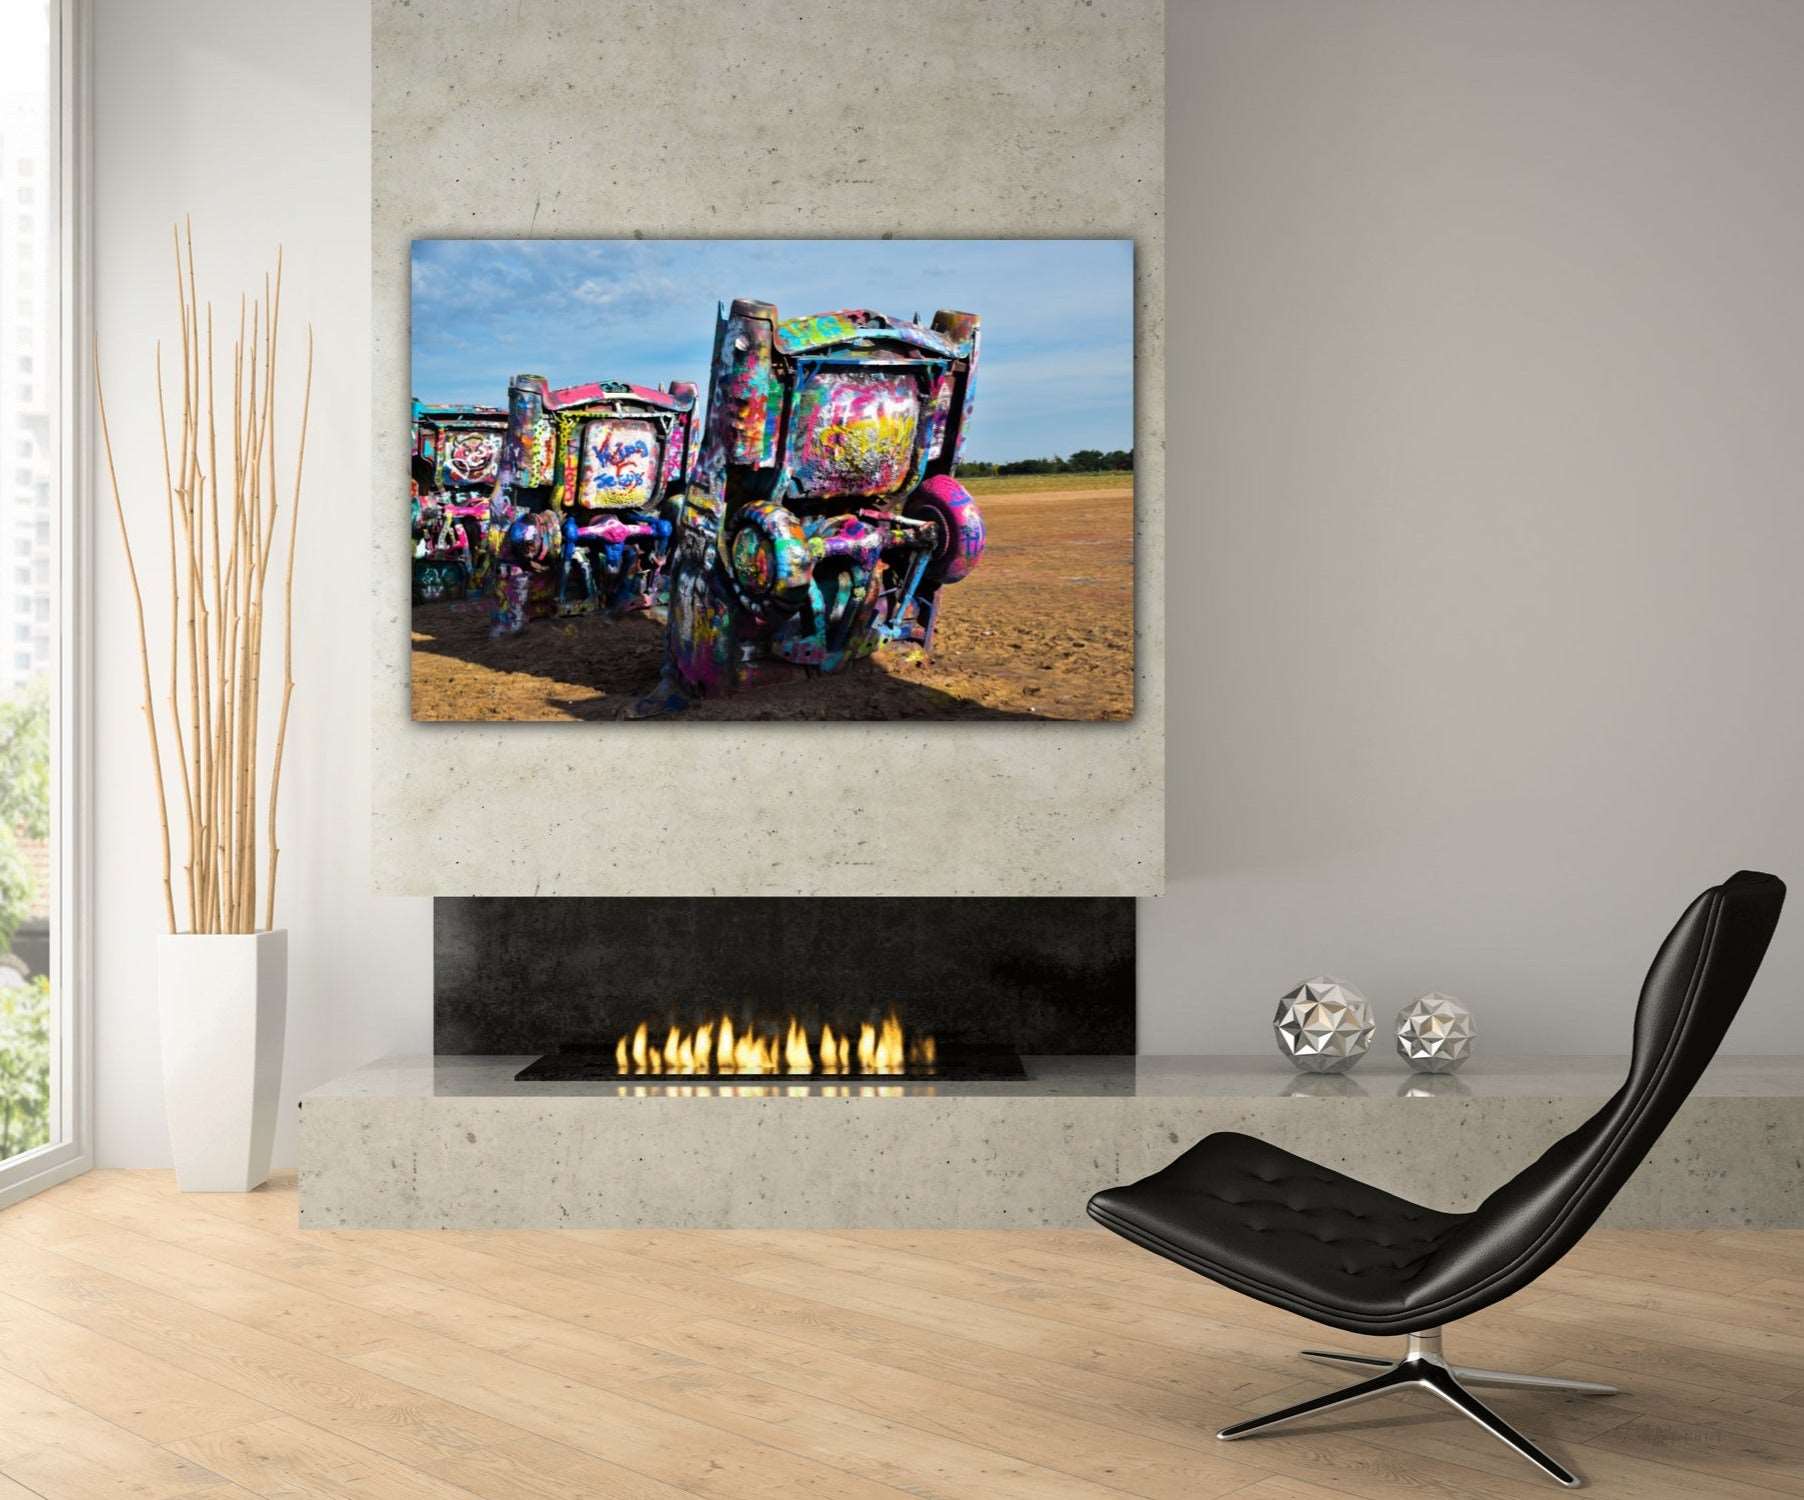 cadillac ranch acrylic print home decor by Jacqueline mb designs wall art 